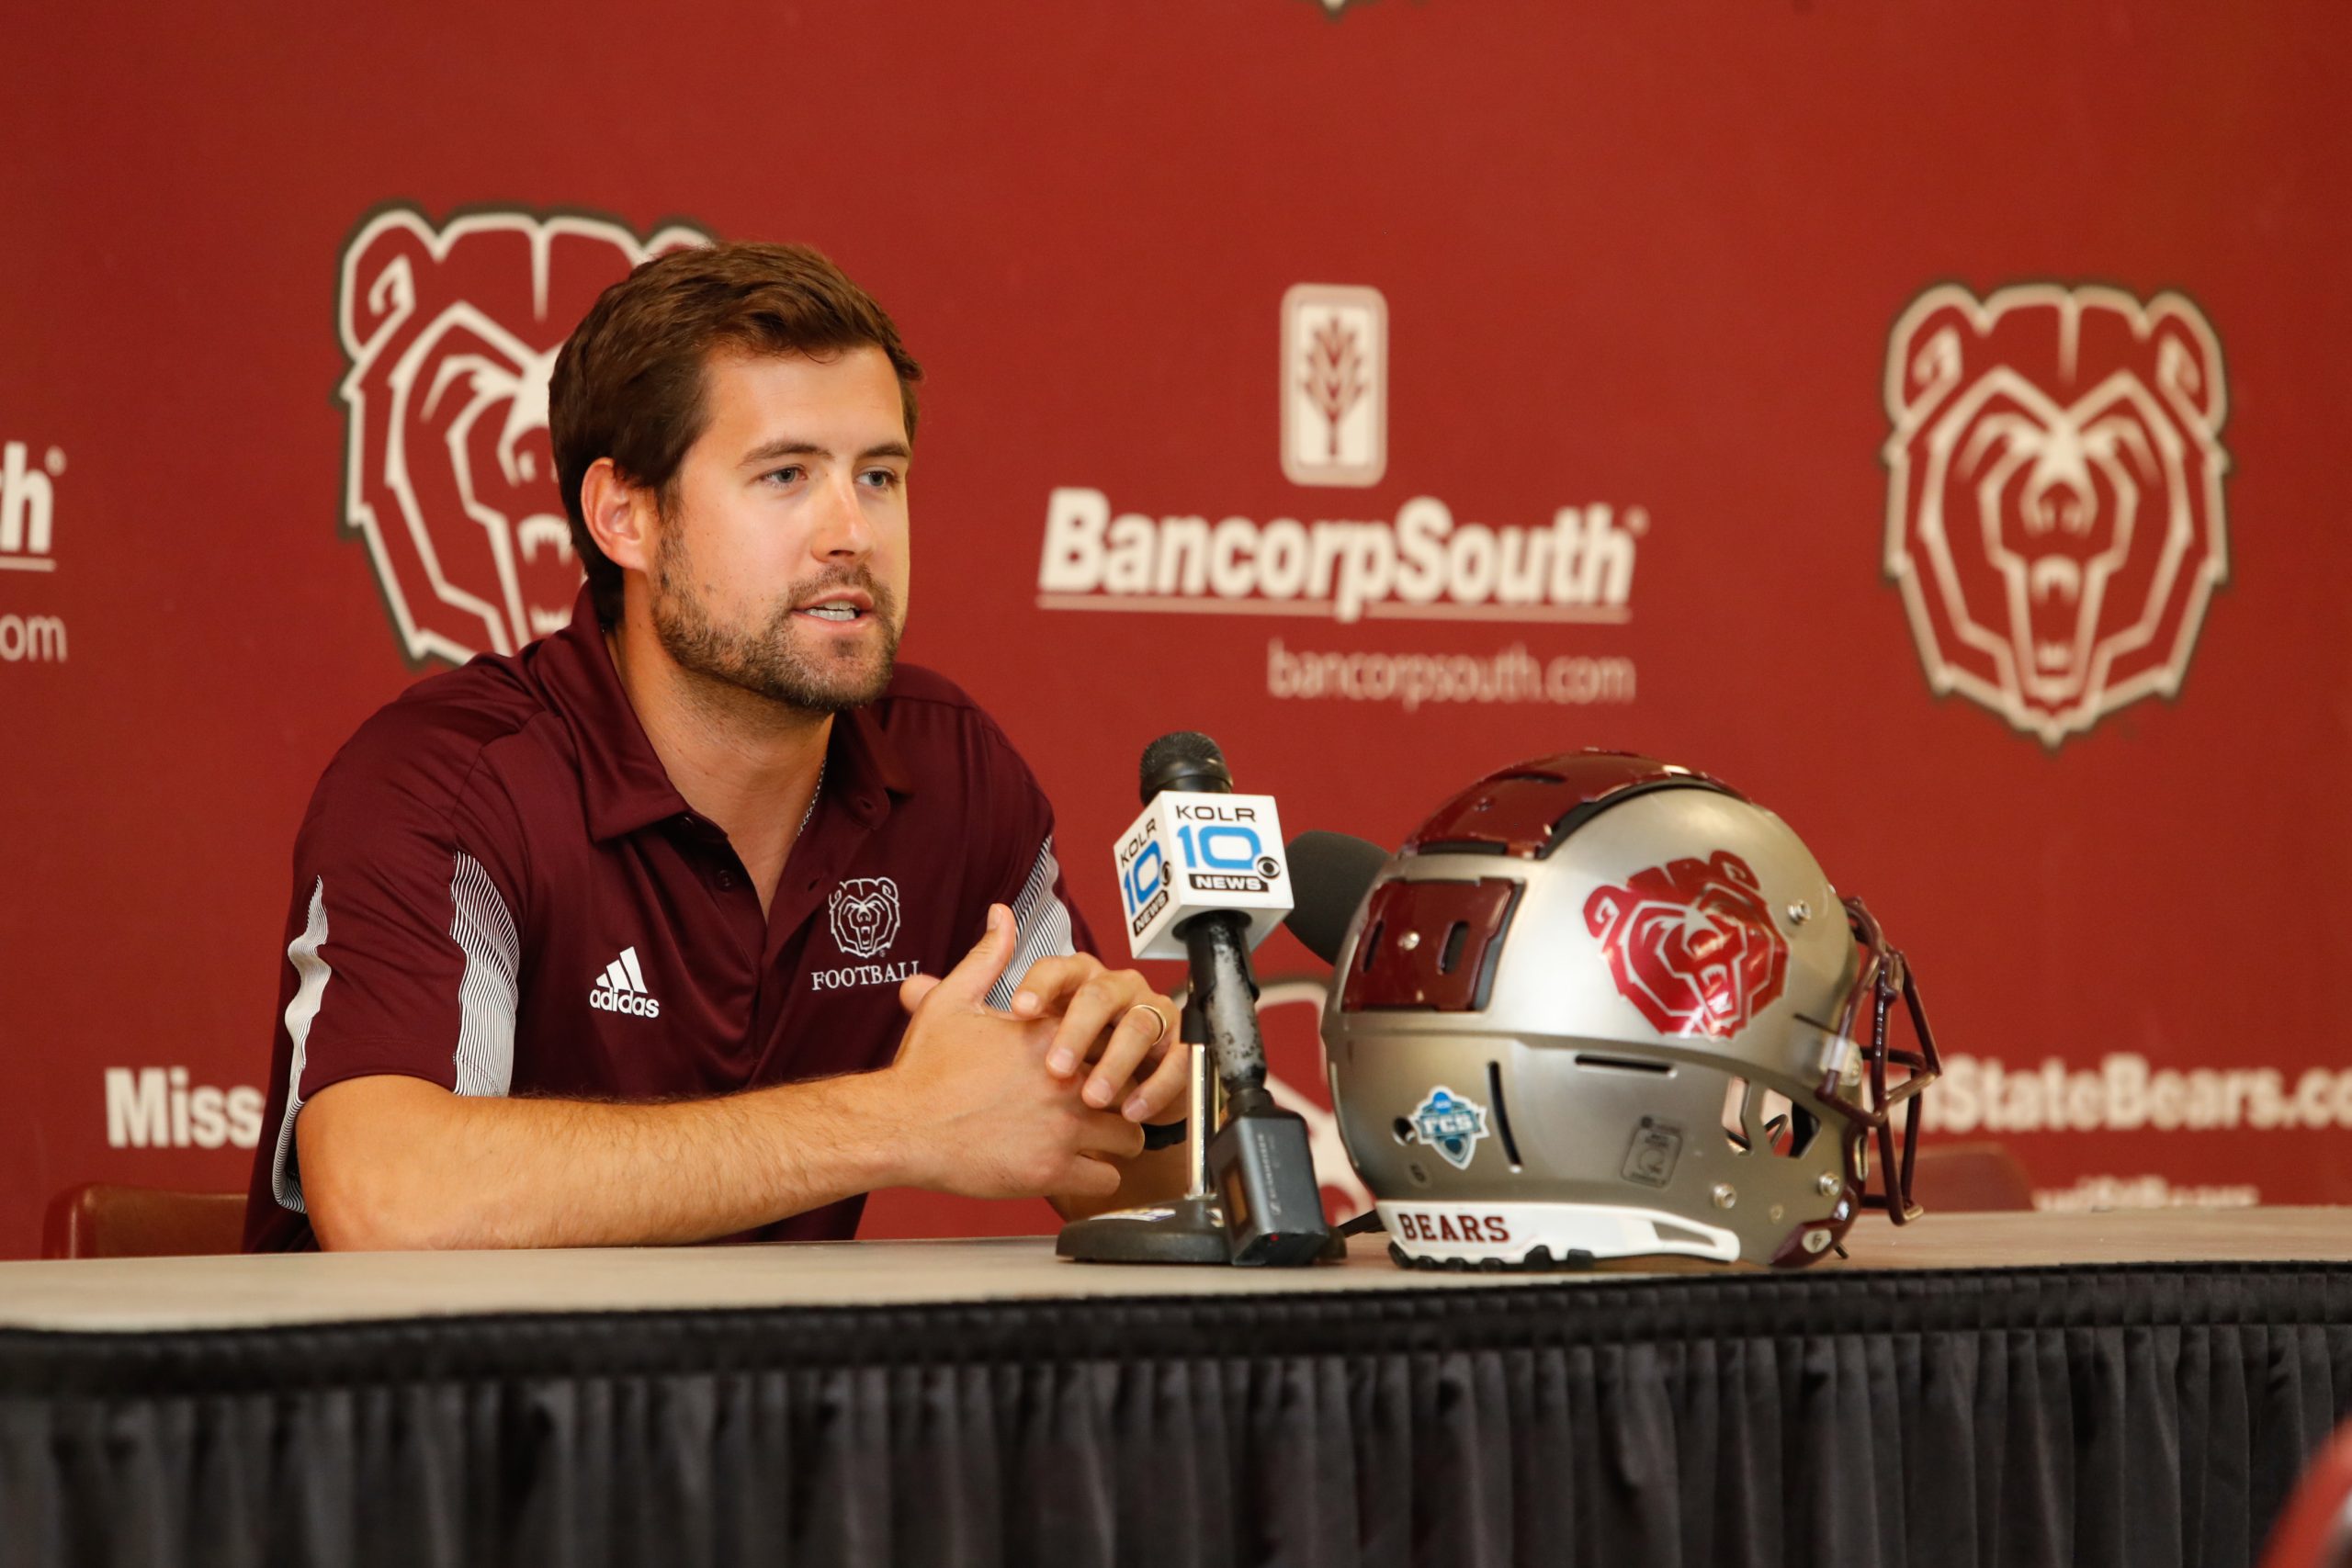 A man in a maroon polo shirt sits at a table and speaks into a microphone